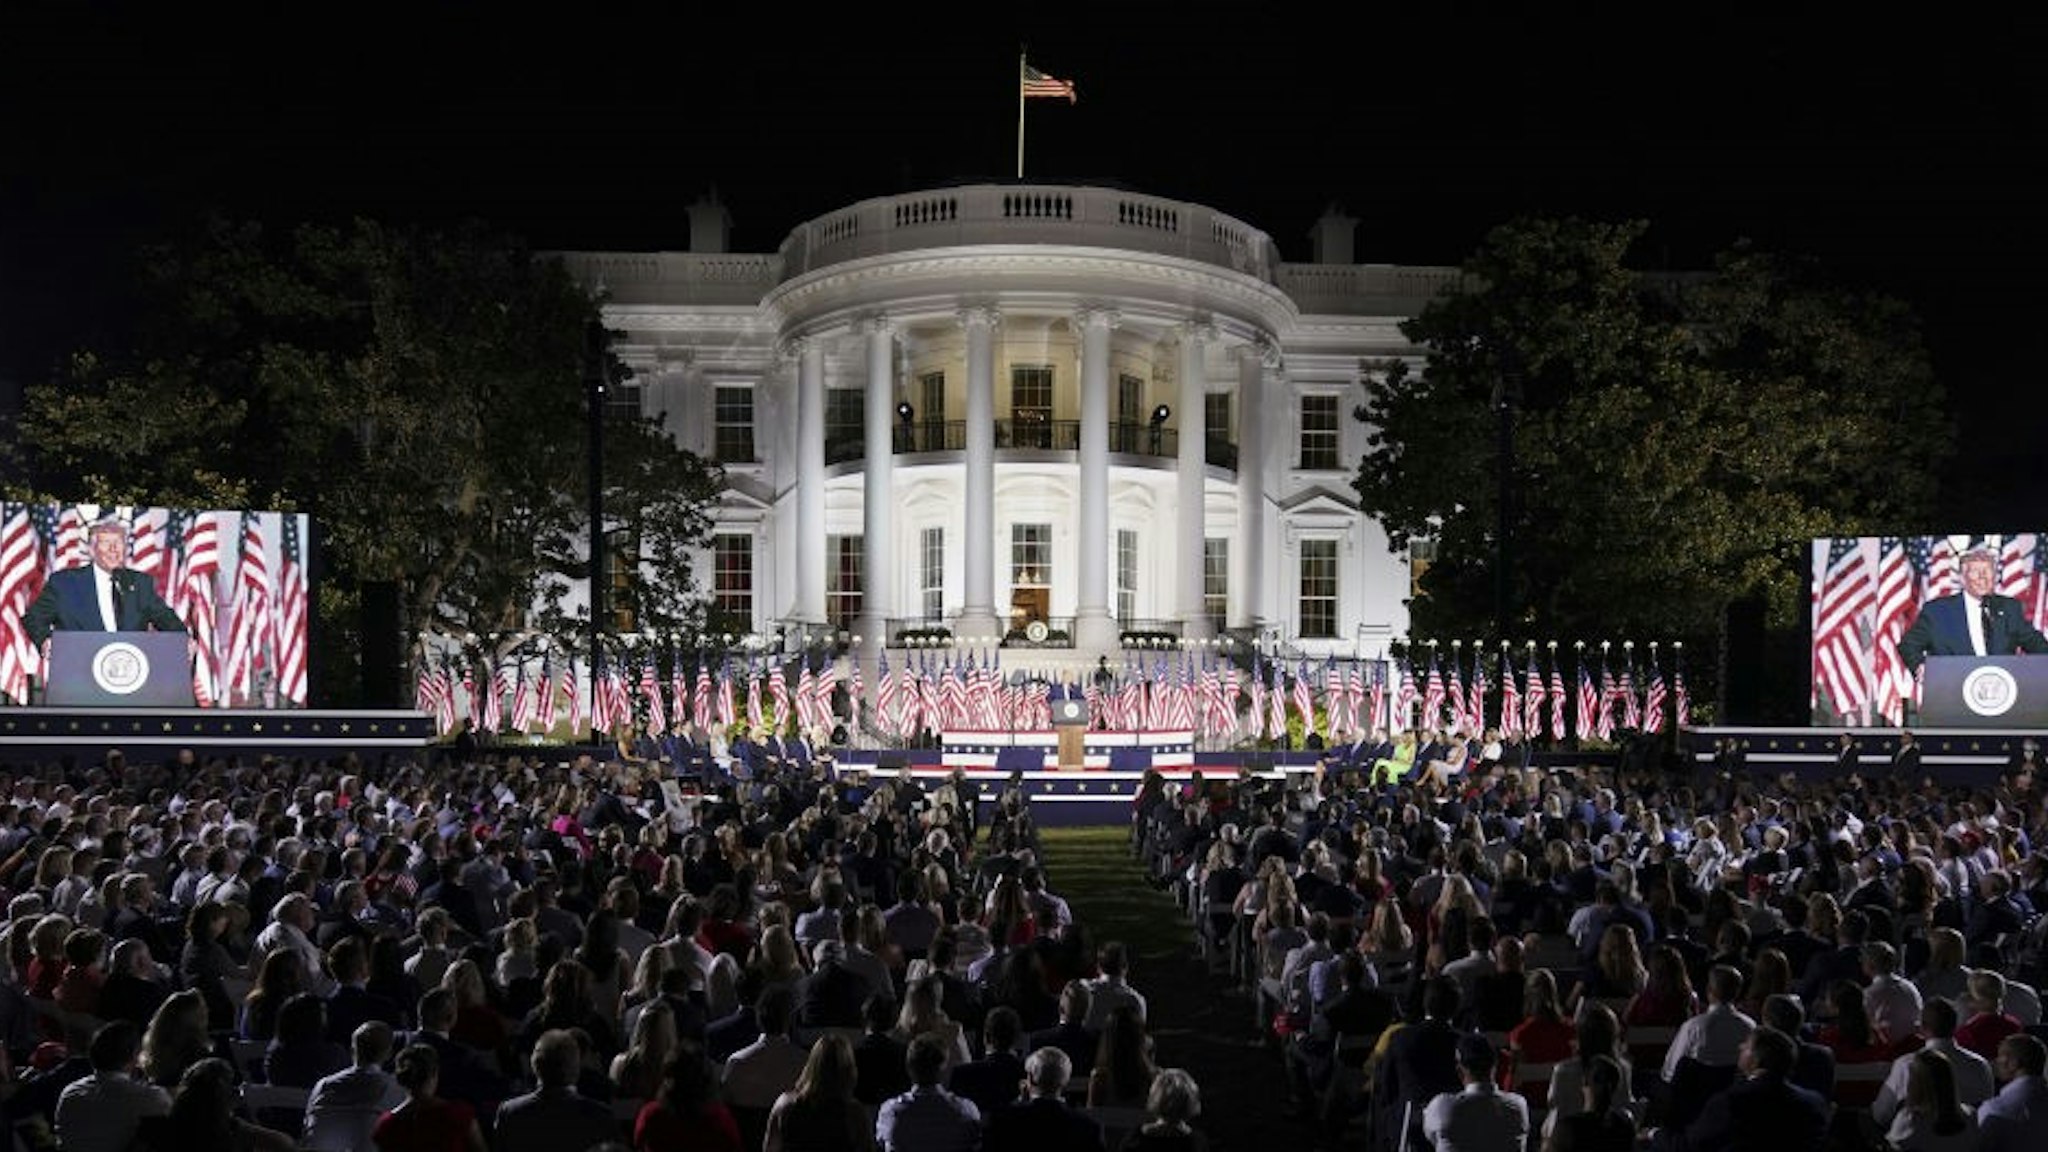 U.S. President Donald Trump, center, speaks during the Republican National Convention on the South Lawn of the White House in Washington, D.C., U.S., on Thursday, Aug. 27, 2020. Trump is asking Americans to return him to office in the speech closing the convention, arguing that voters can't trust Joe Biden or the Democratic Party to navigate the coronavirus pandemic or salve the nation's racial divisions. Photographer: